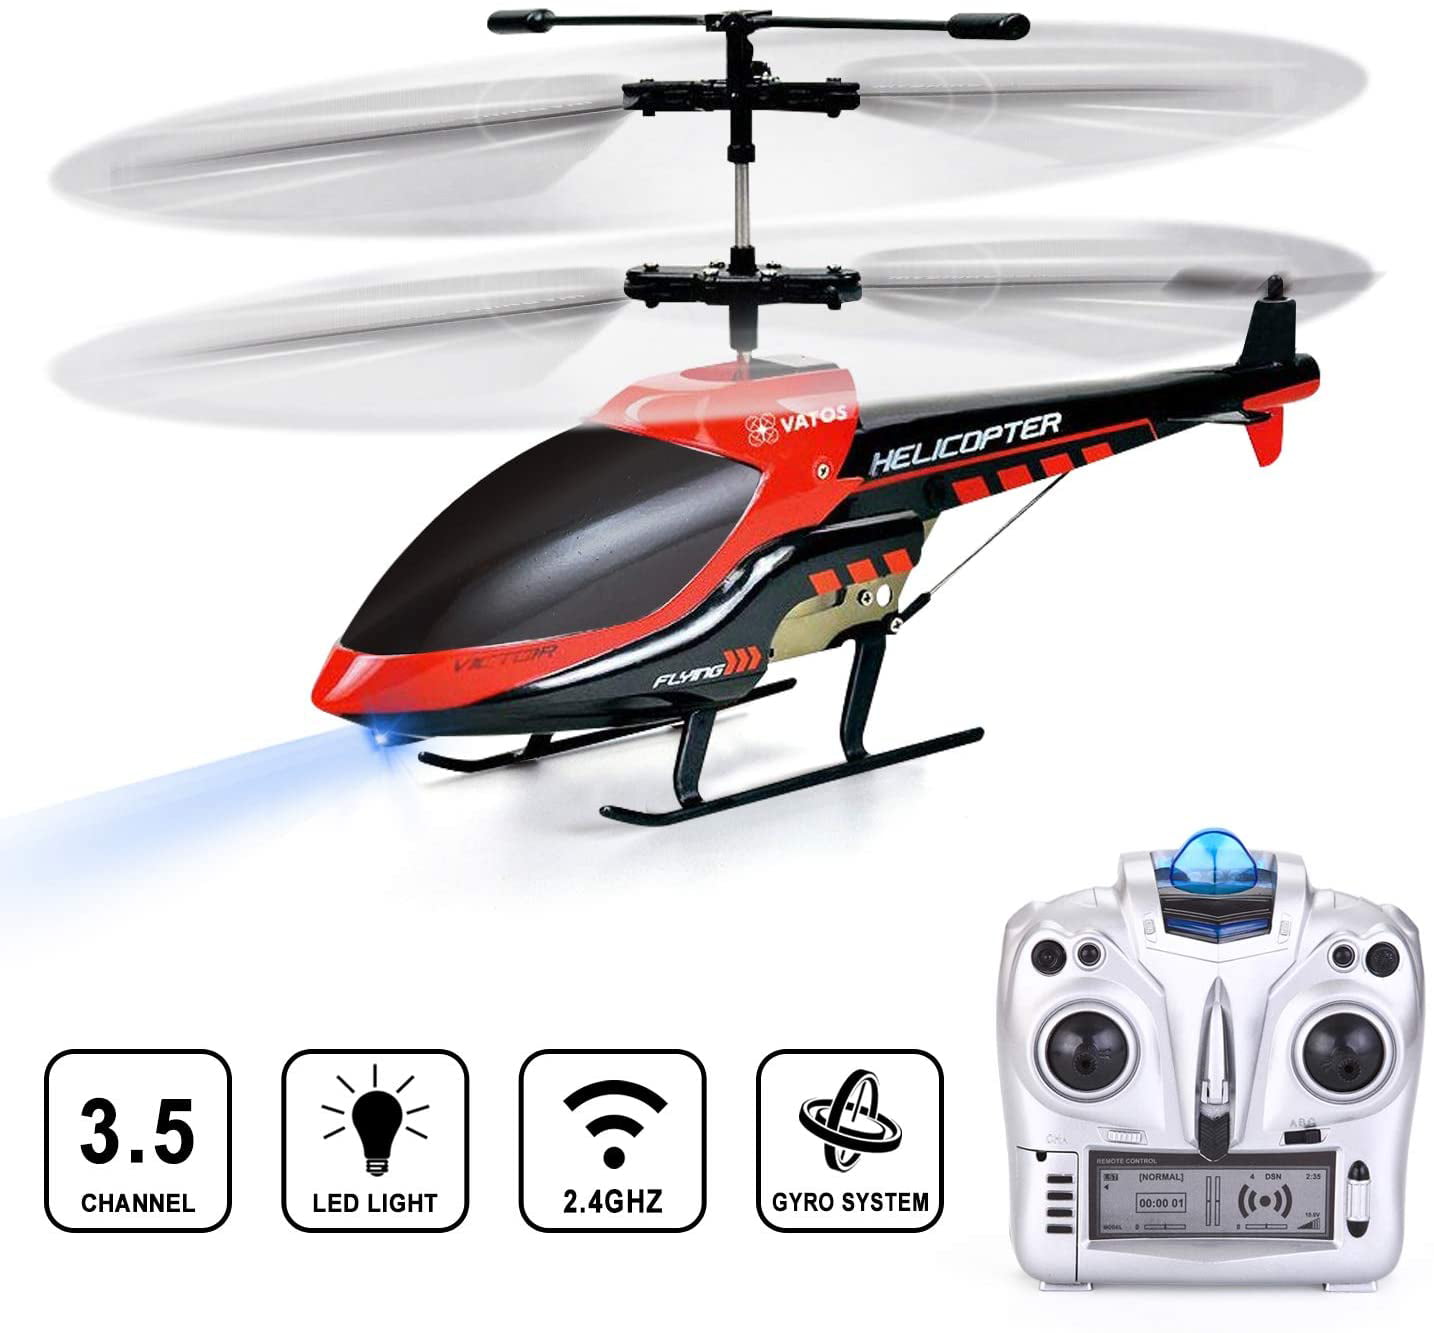 VATOS Remote Control Helicopter RC Helicopter with Gyro and LED Light 3.5 